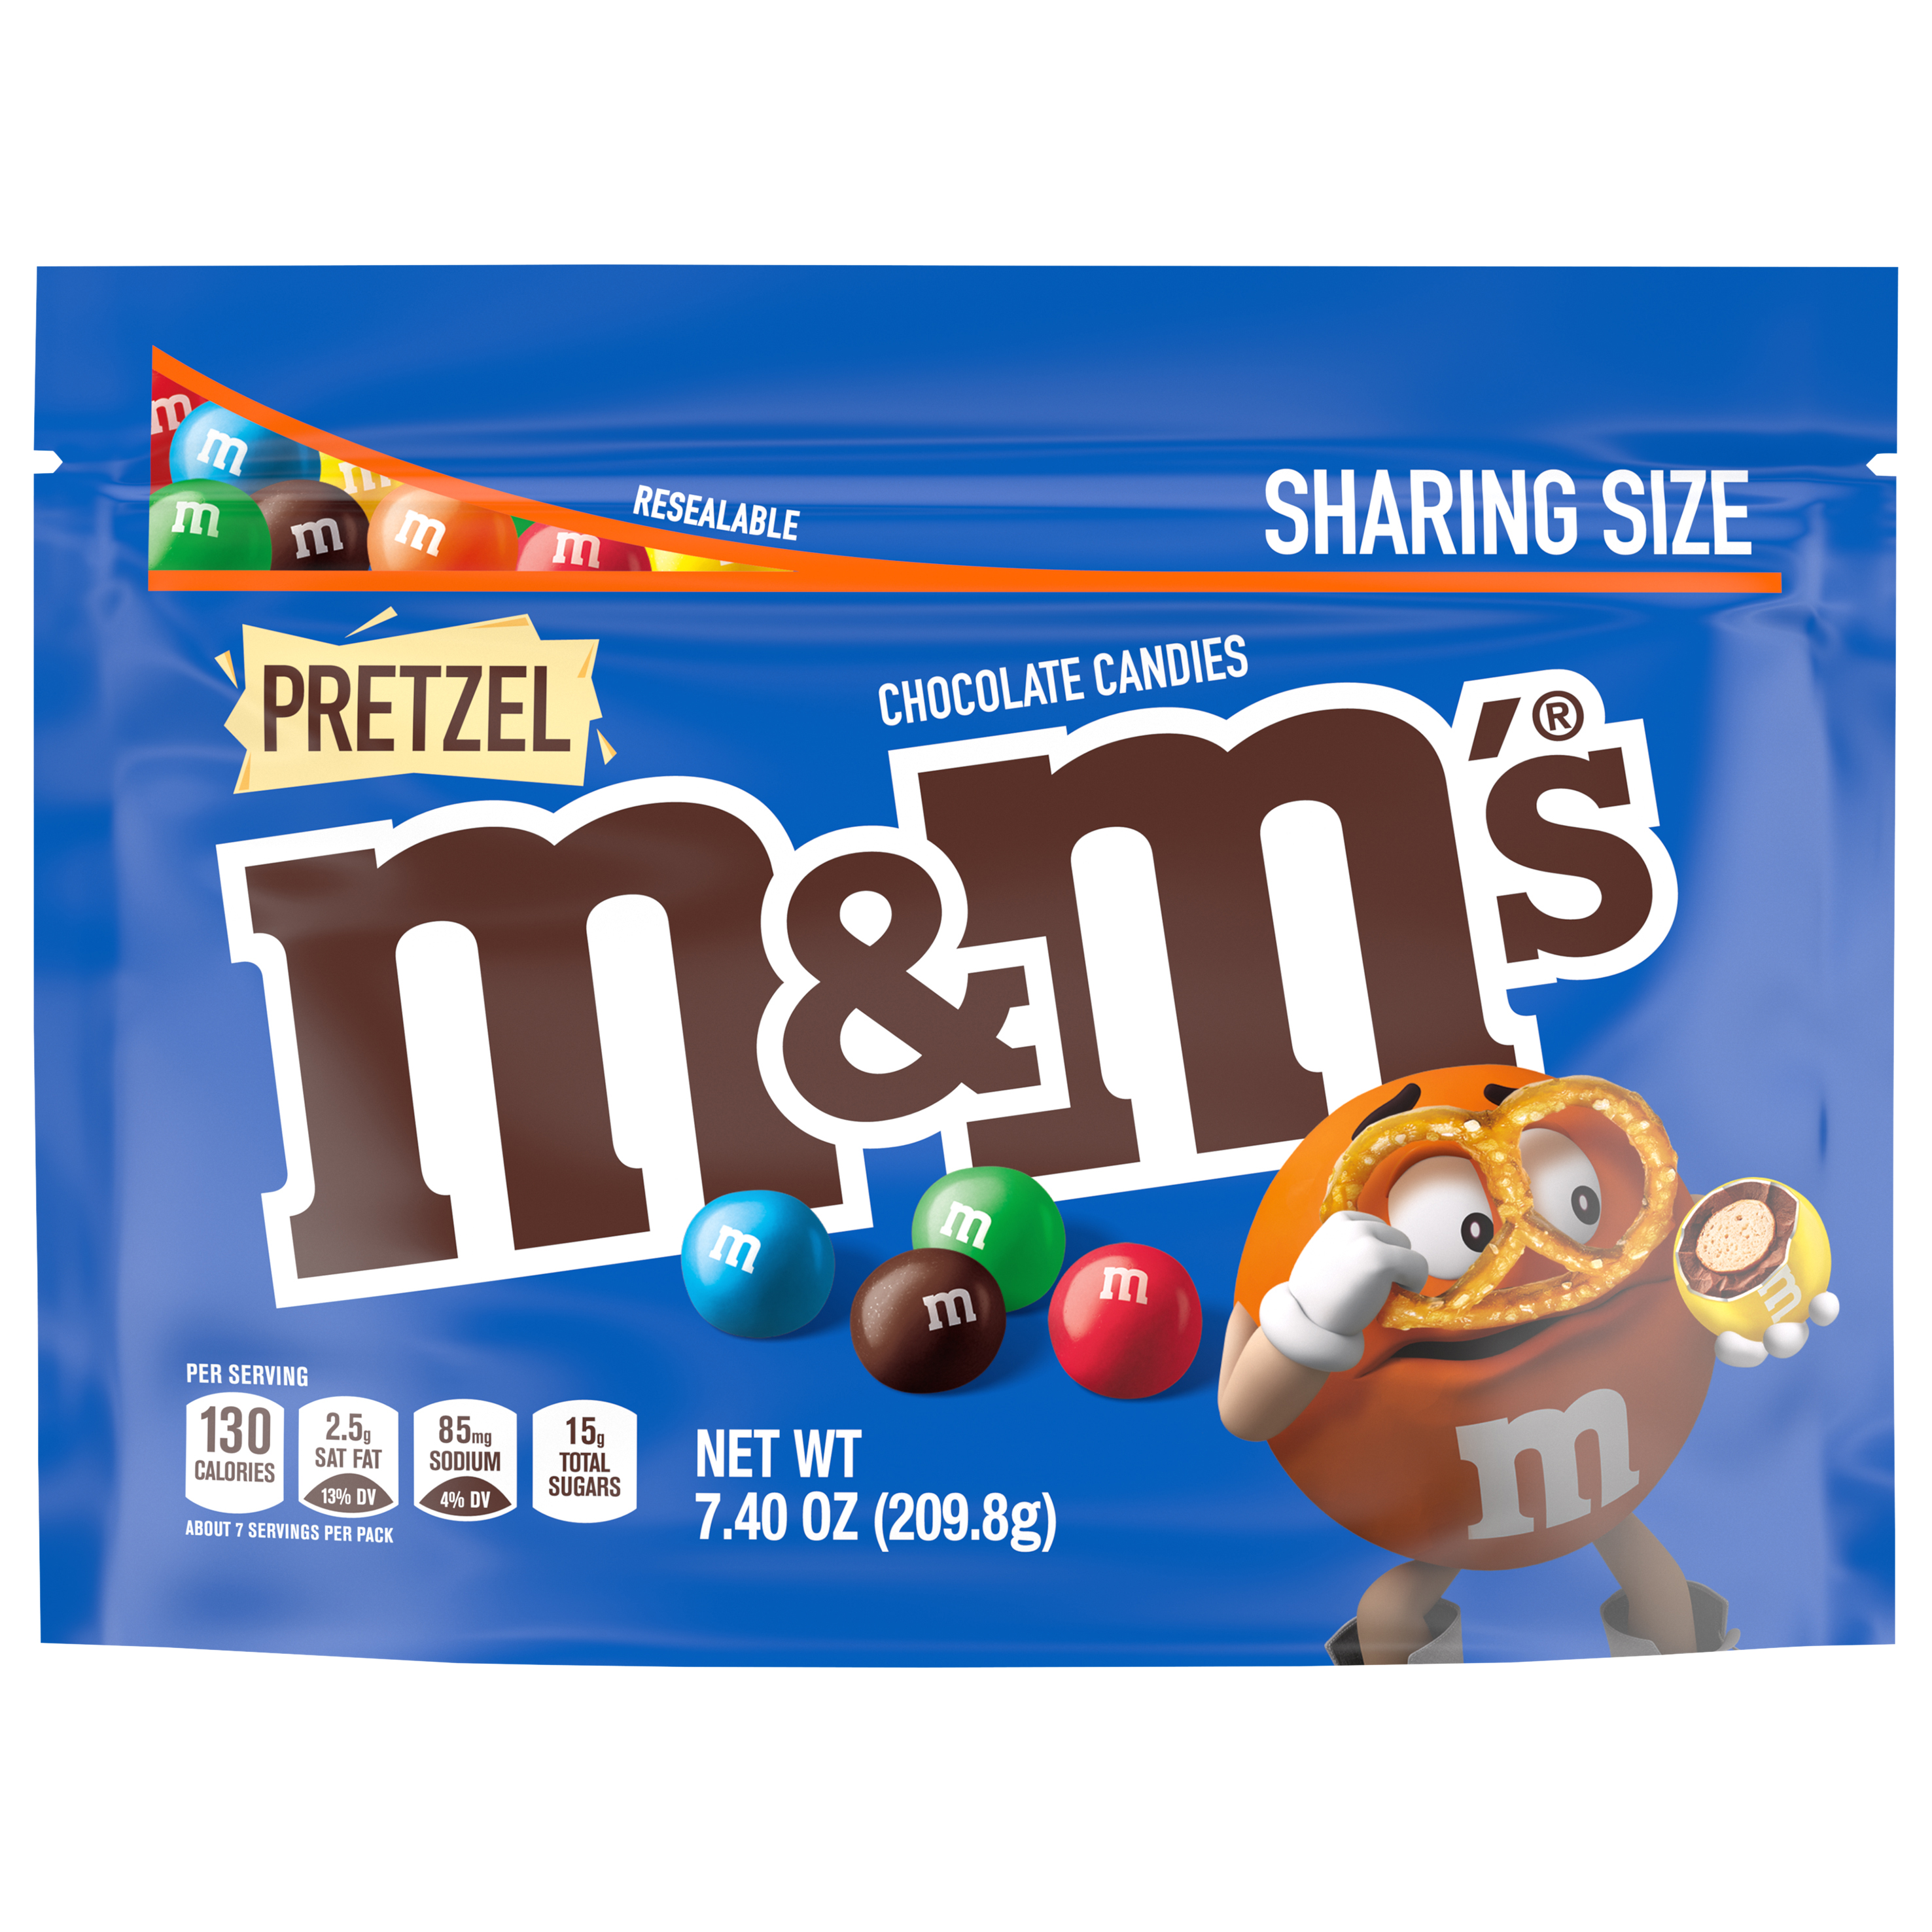 Calories in Chocolate Candies, Pretzel, Sharing Size from M&M's